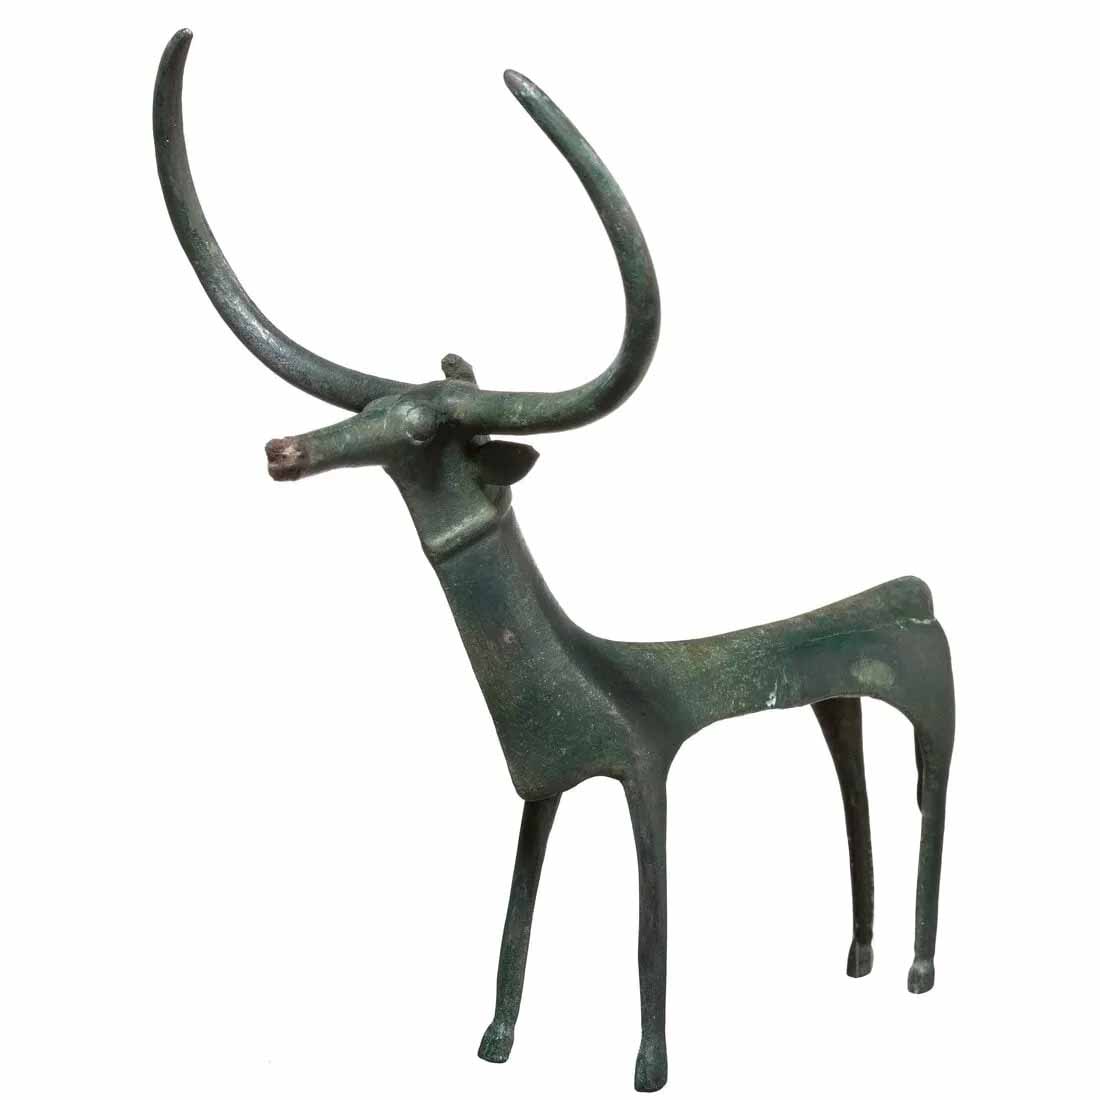 Sardinian bronze votive of a bull, estimated at €4,500-€9,000 ($4,800-$9,600) at Hermann Historica.